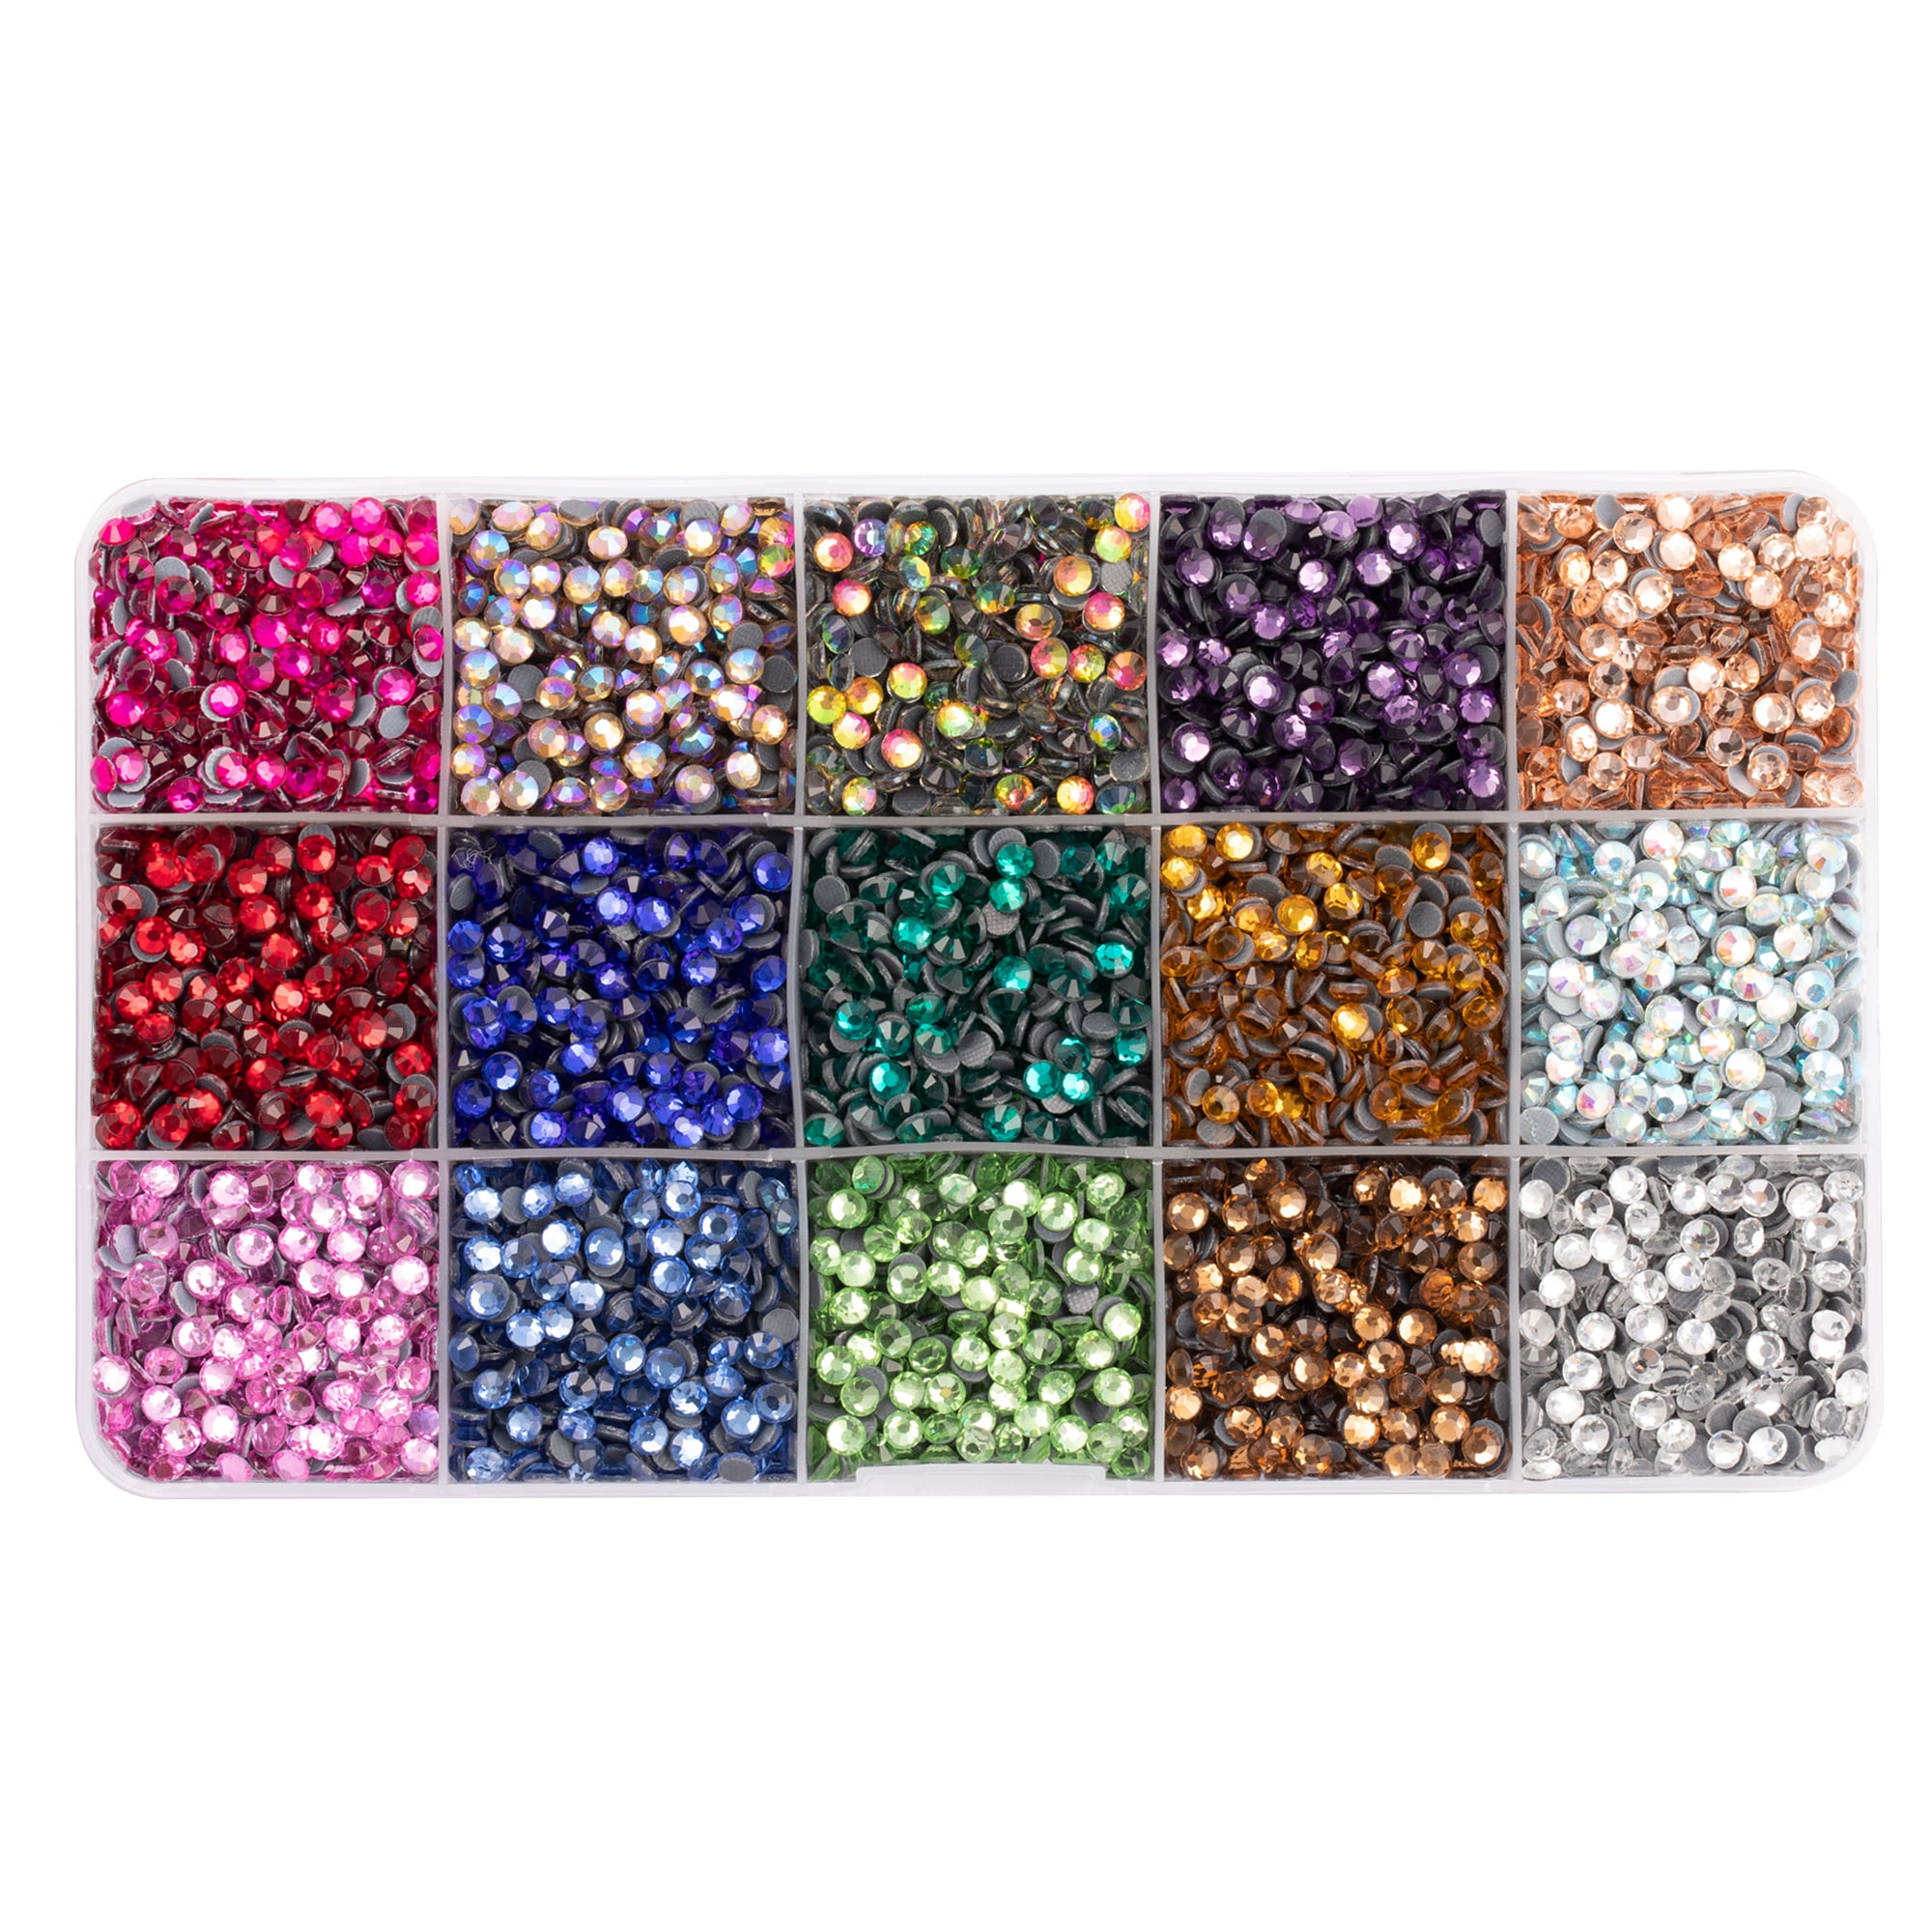 Worthofbest 5mm SS20 Hotfix Rhinestones for Fabric, Clothing, Clothes,  Cardstock, Leather and Wood - 15 Colors